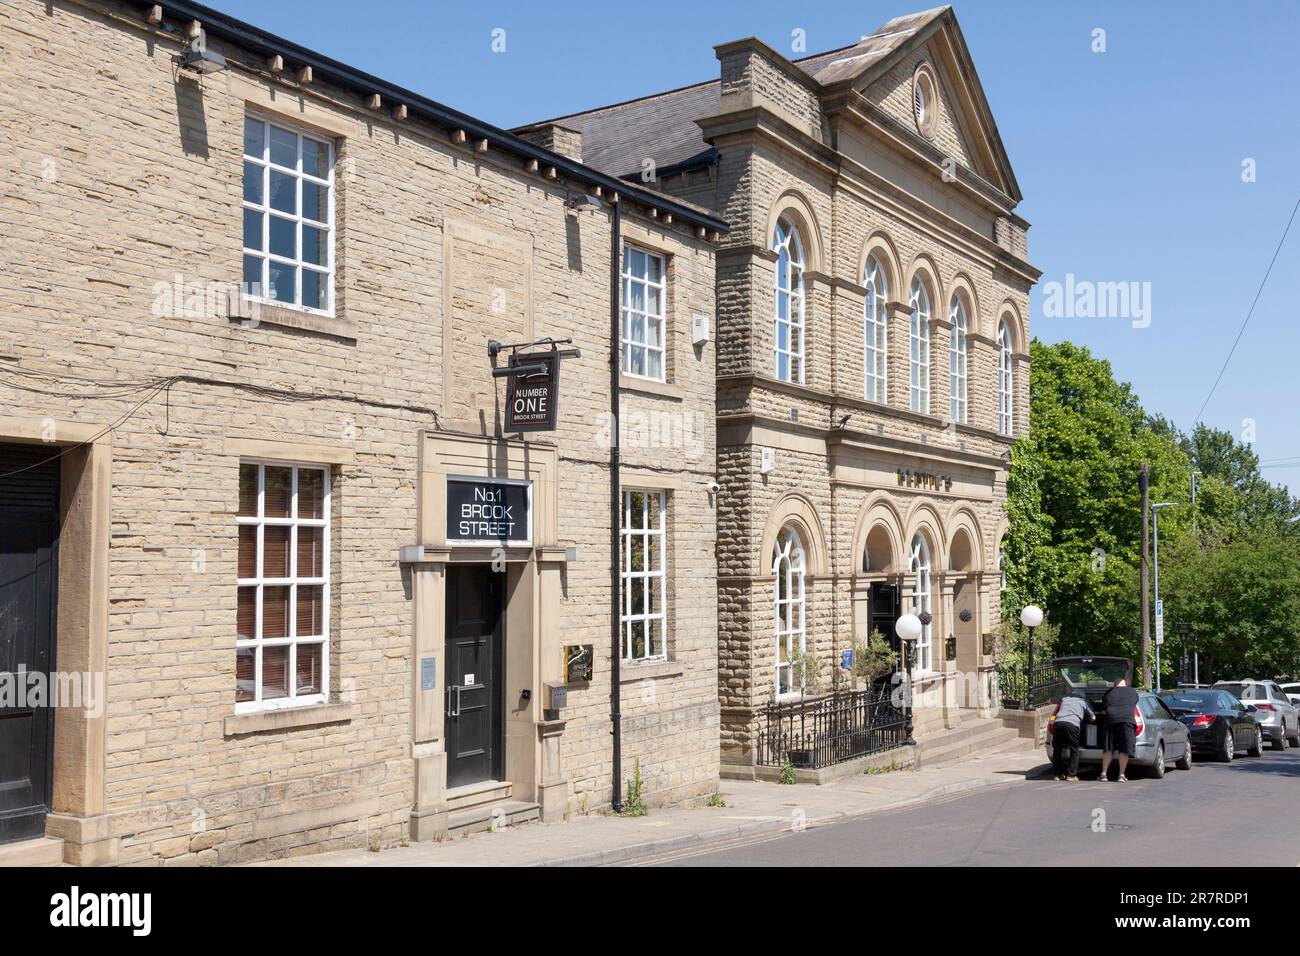 Bertie's meeting rooms and conference venue, Elland, West Yorkshire Stock Photo